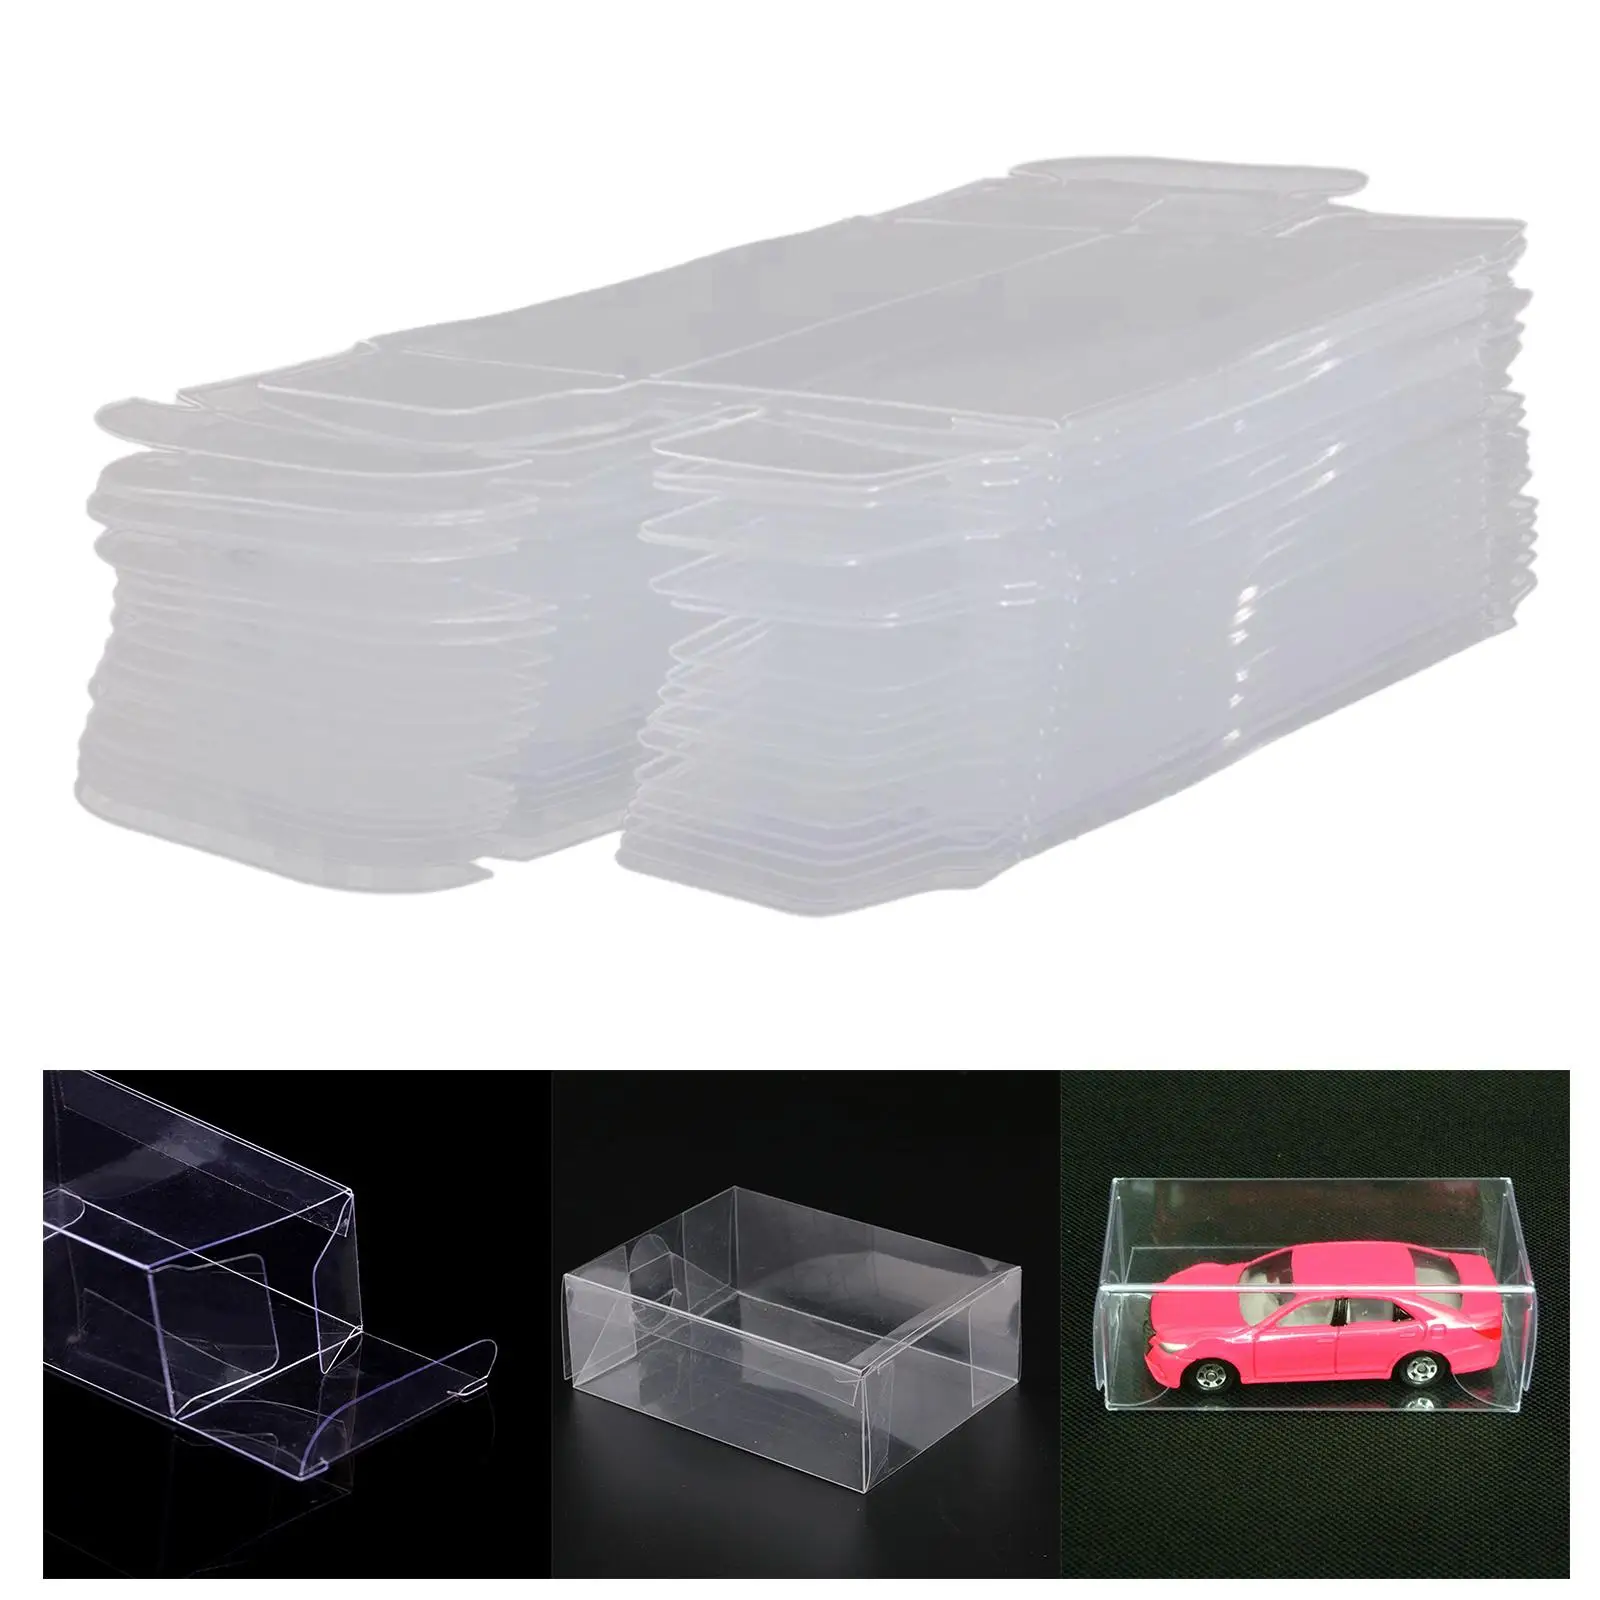 50x 1/64 Protector Clear PVC Cases 1/64 Car Toy Display Showcase for Collectibles Dolls Action Figures Toys Miniature Figurines